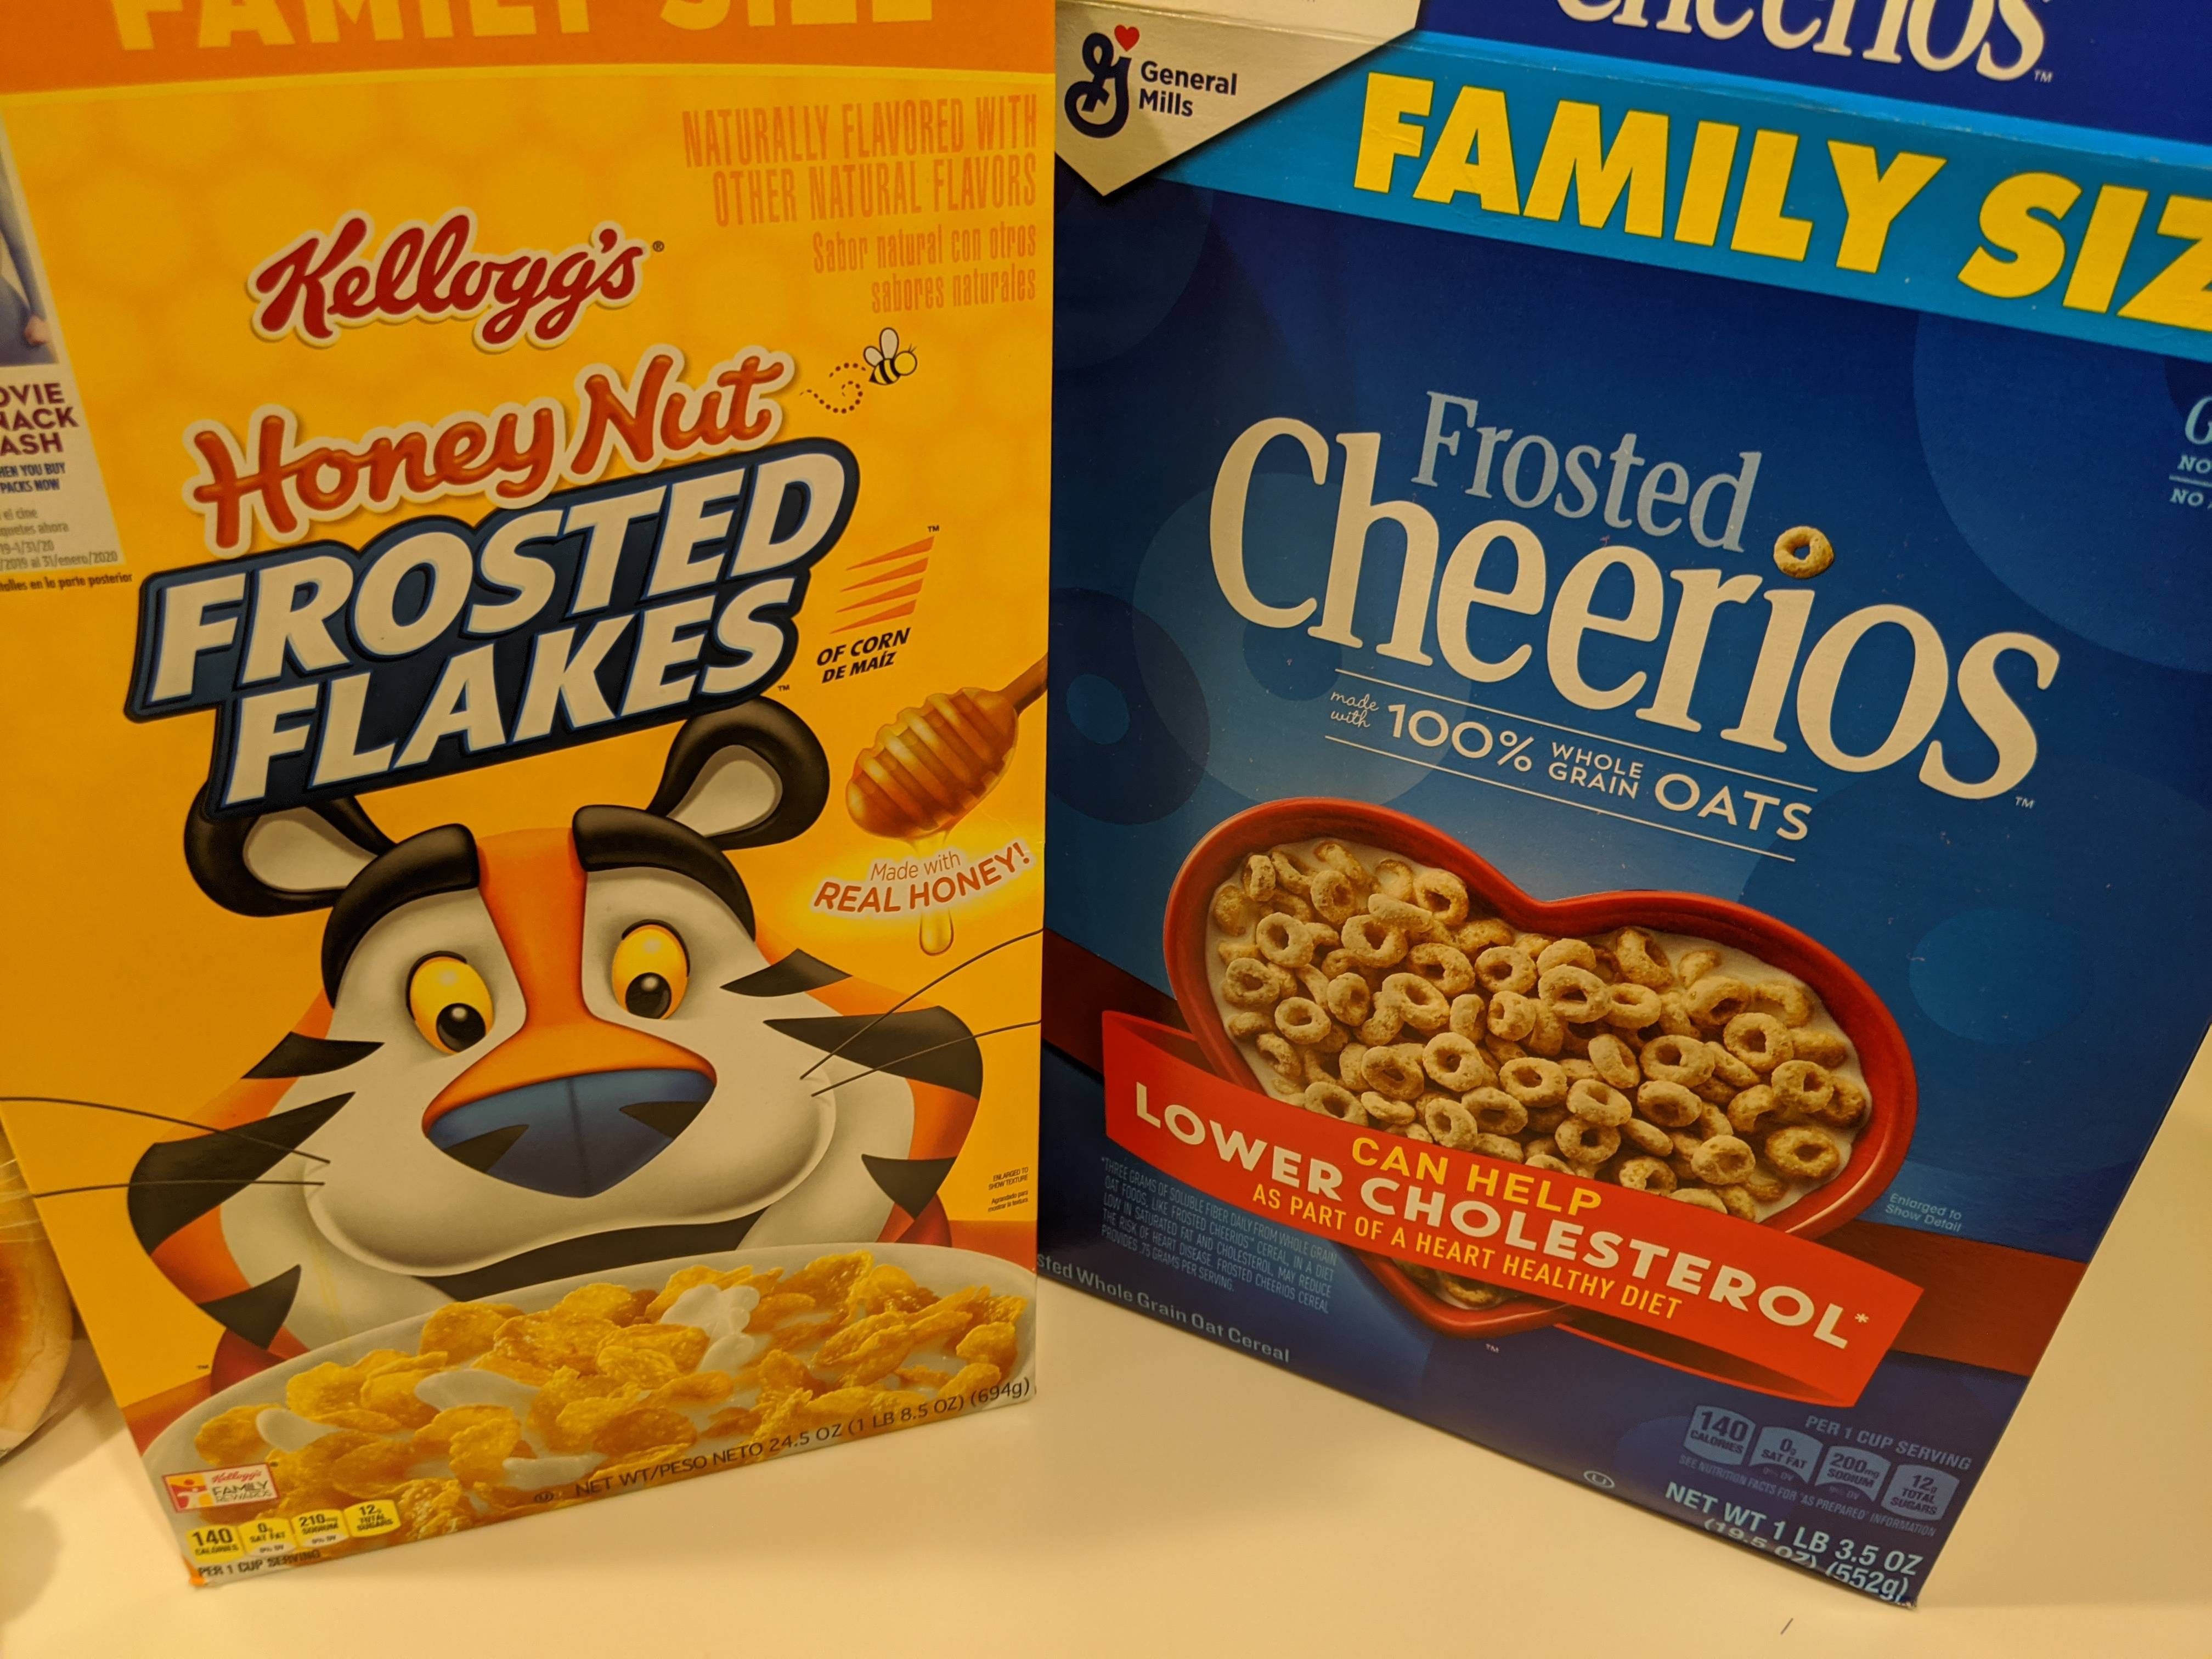 I told my wife to get frosted flakes and honey nut Cheerios.